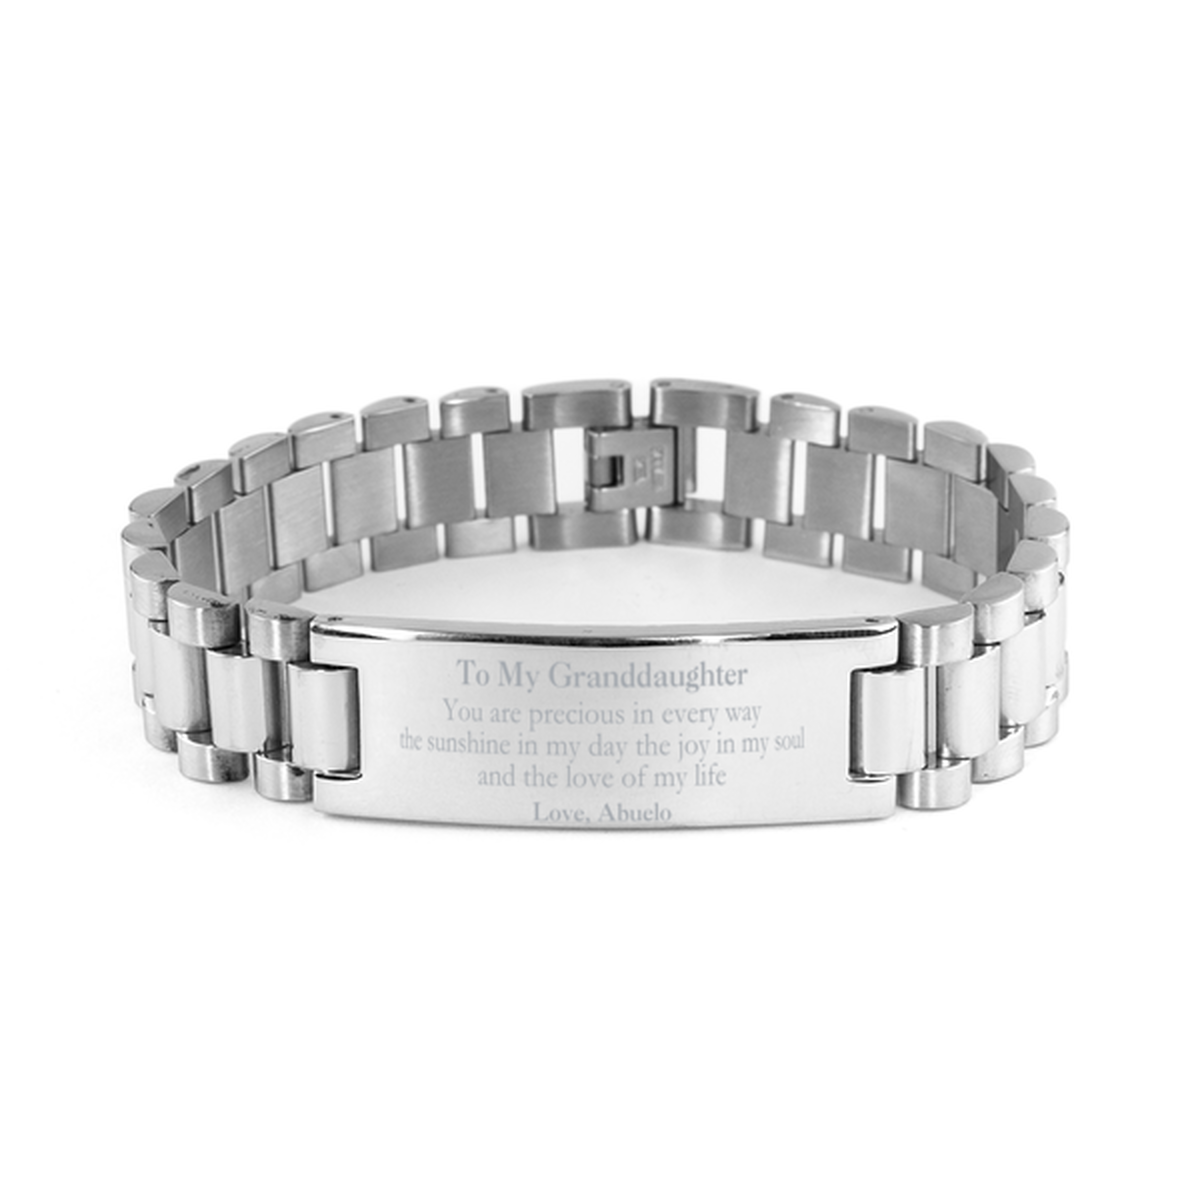 Graduation Gifts for Granddaughter Ladder Stainless Steel Bracelet Present from Abuelo, Christmas Granddaughter Birthday Gifts Granddaughter You are precious in every way the sunshine in my day. Love, Abuelo